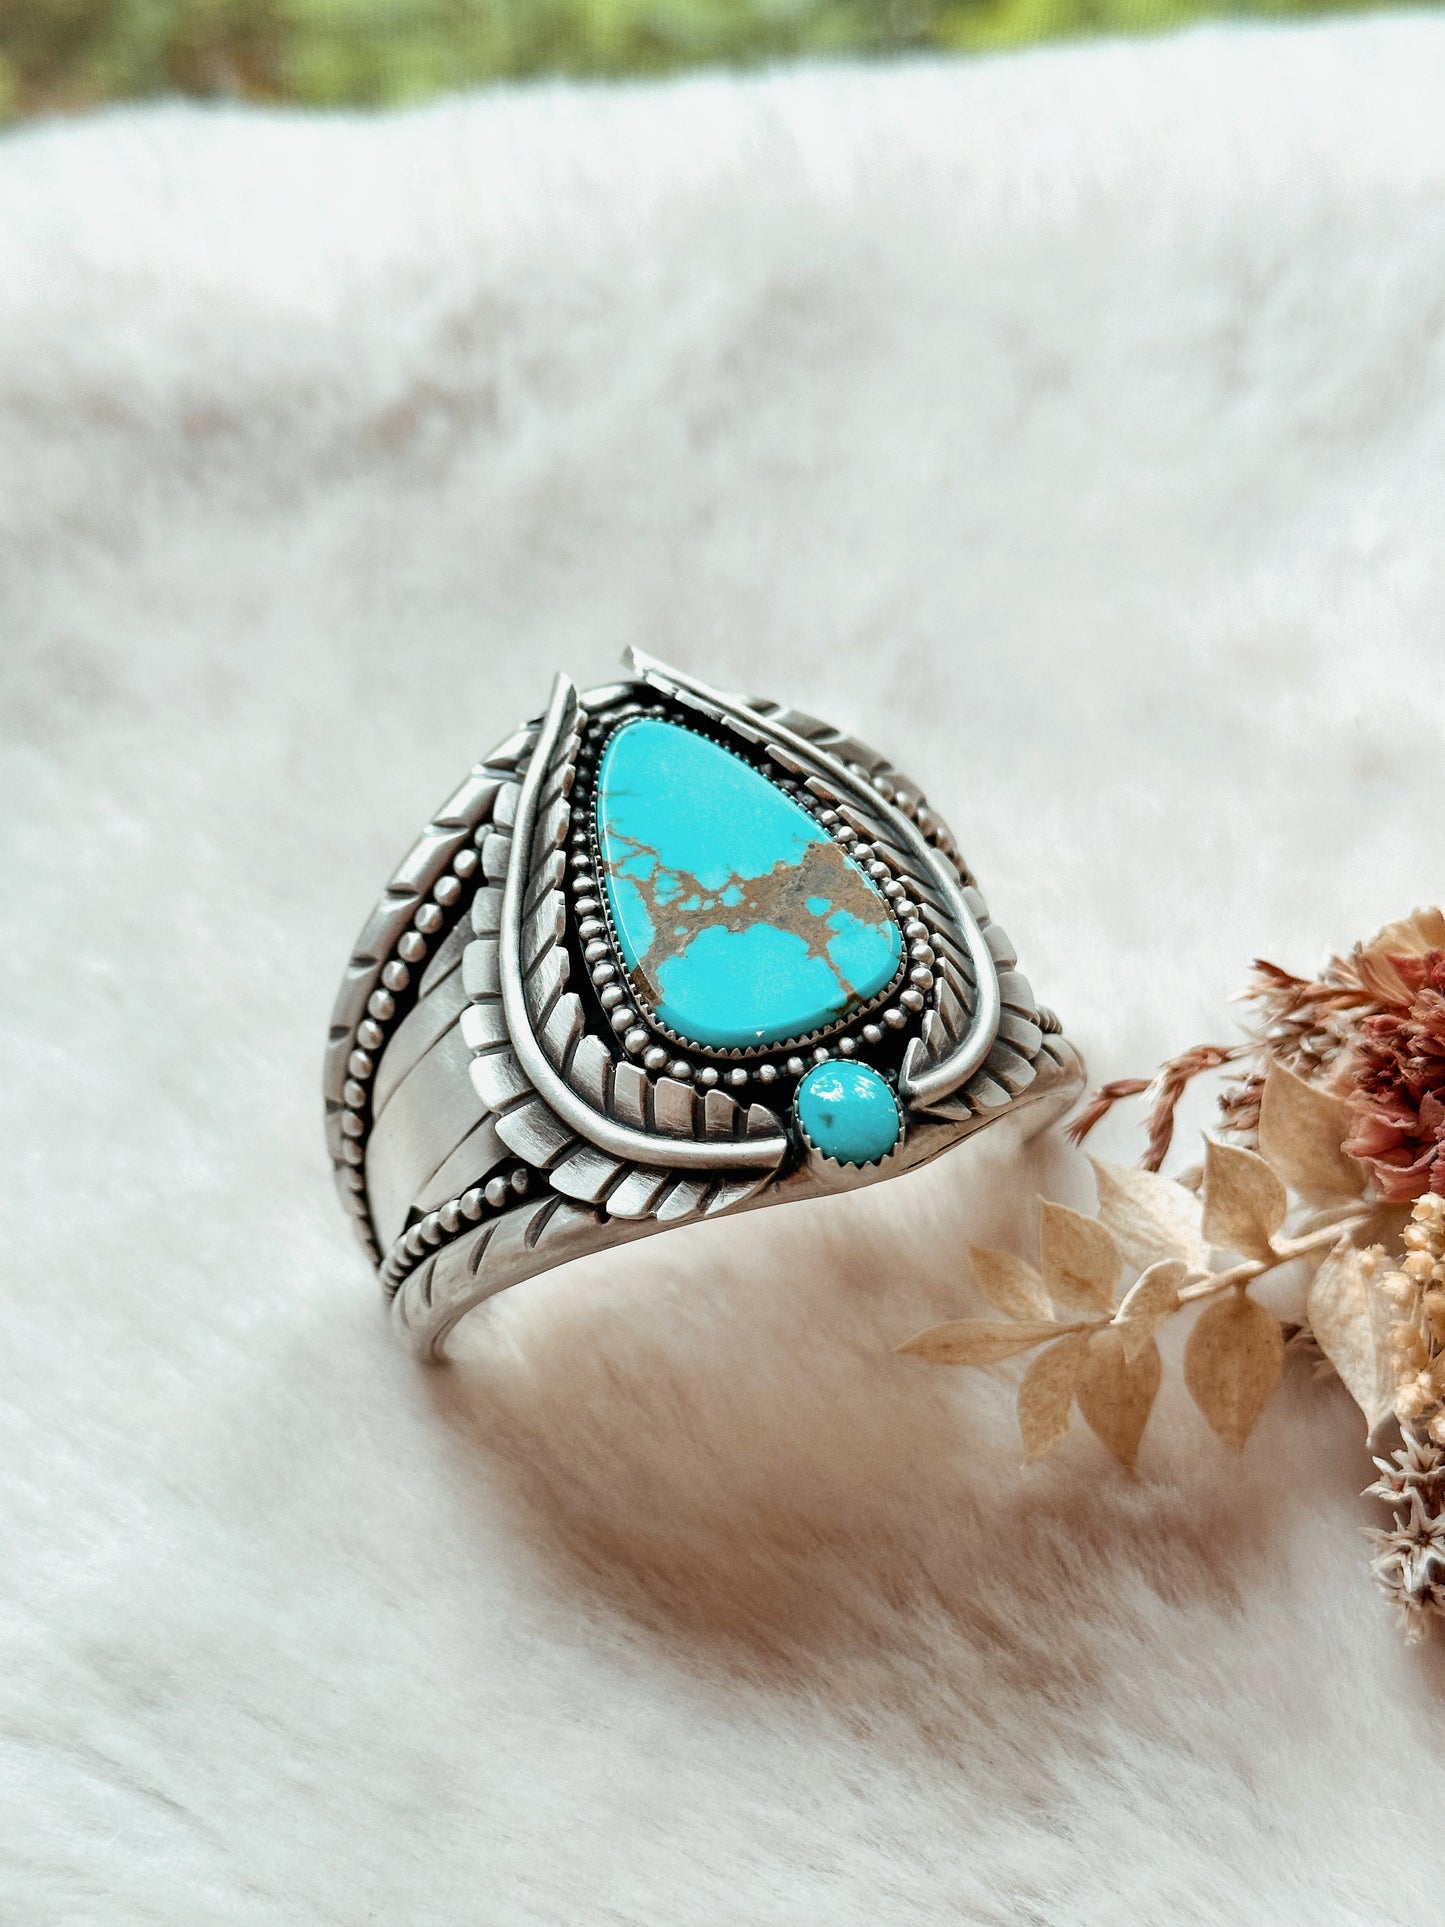 Halcyon Heirloom Botanical Cuff with Sonoran Turquoise